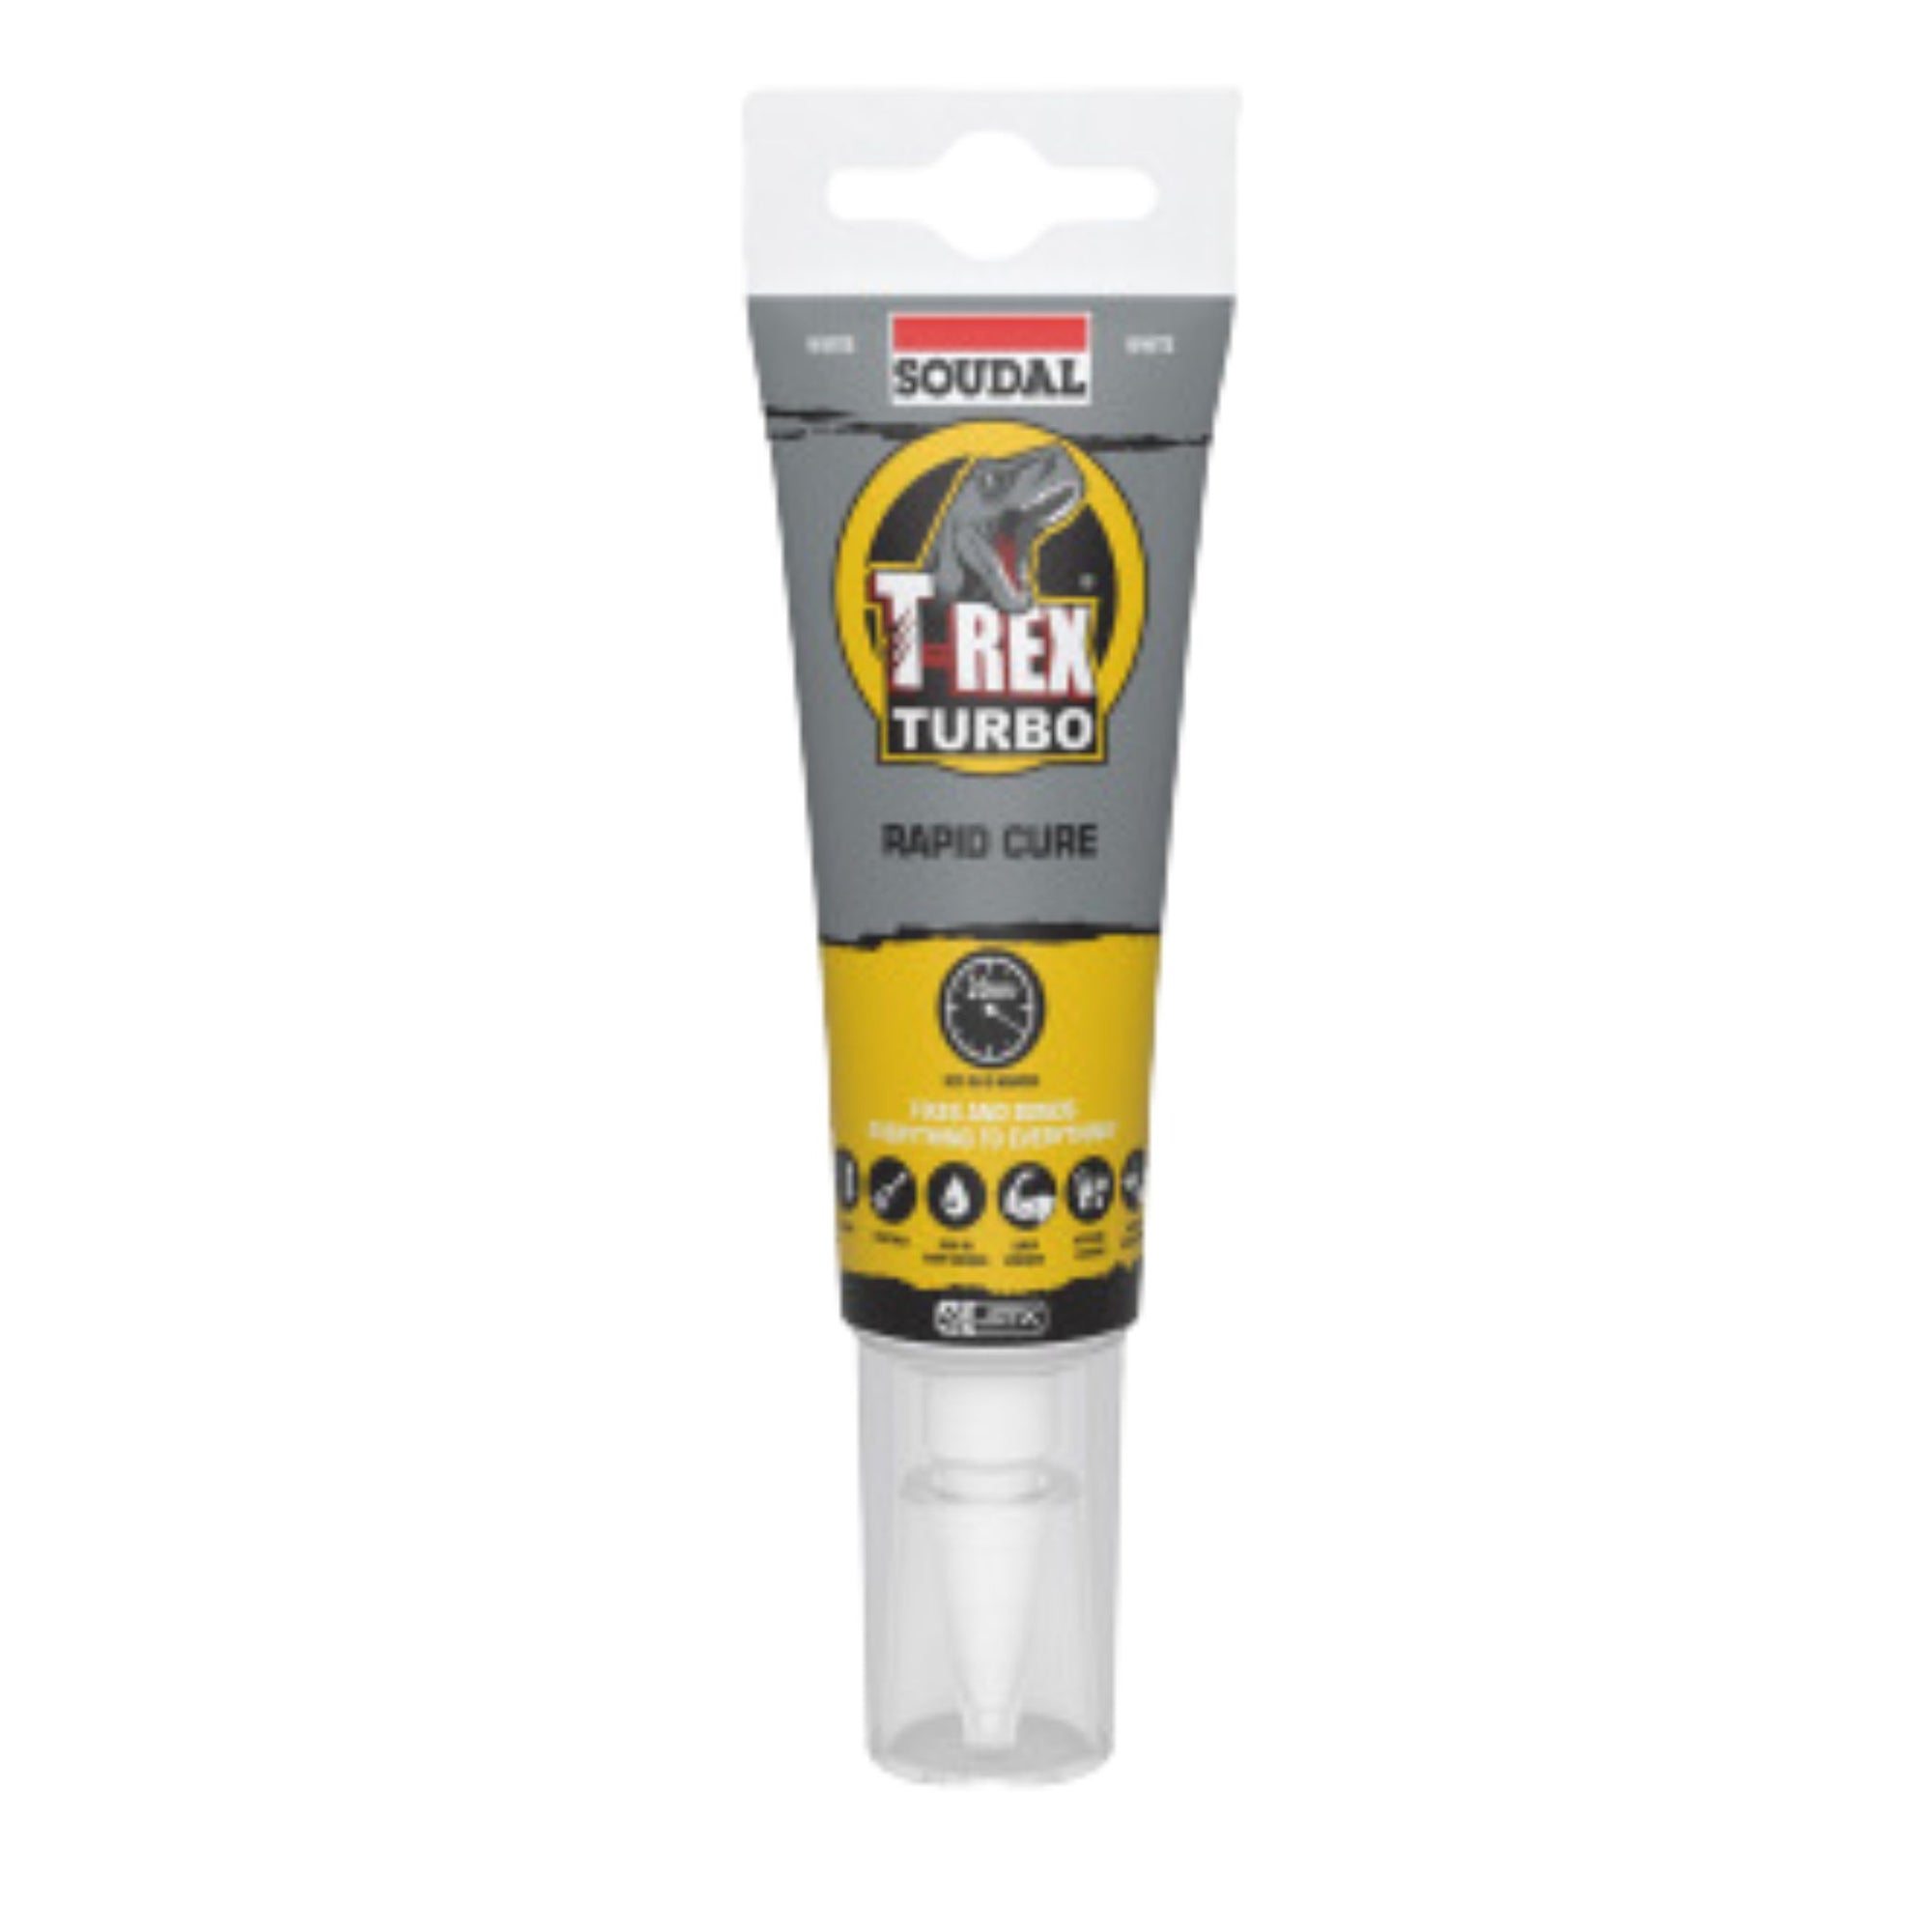 Soudal 132601 T-Rex Turbo Rapid Cure Adhesive Sealant 125mL (White) - South East Clearance Centre